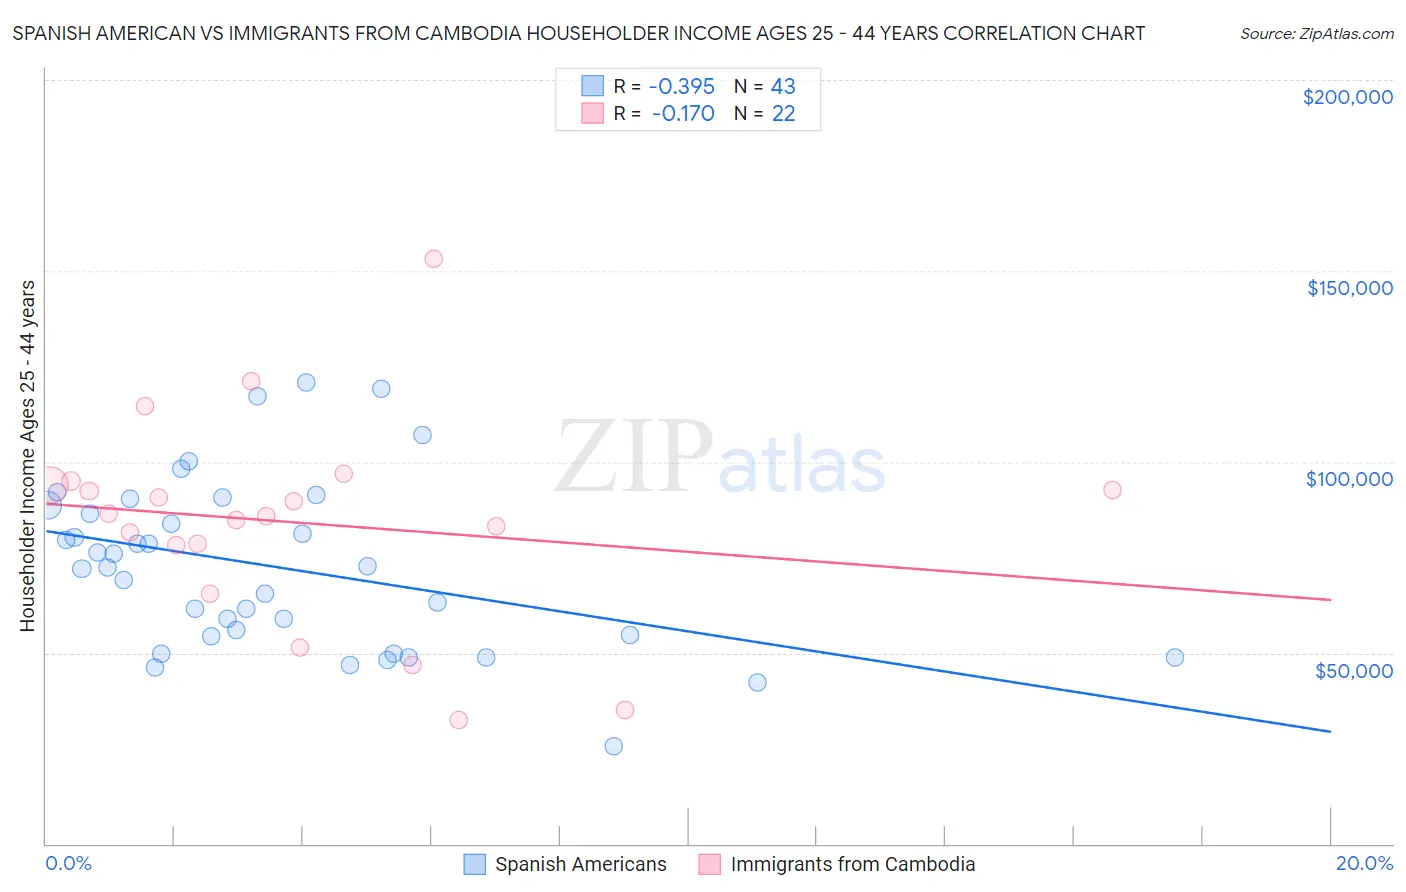 Spanish American vs Immigrants from Cambodia Householder Income Ages 25 - 44 years